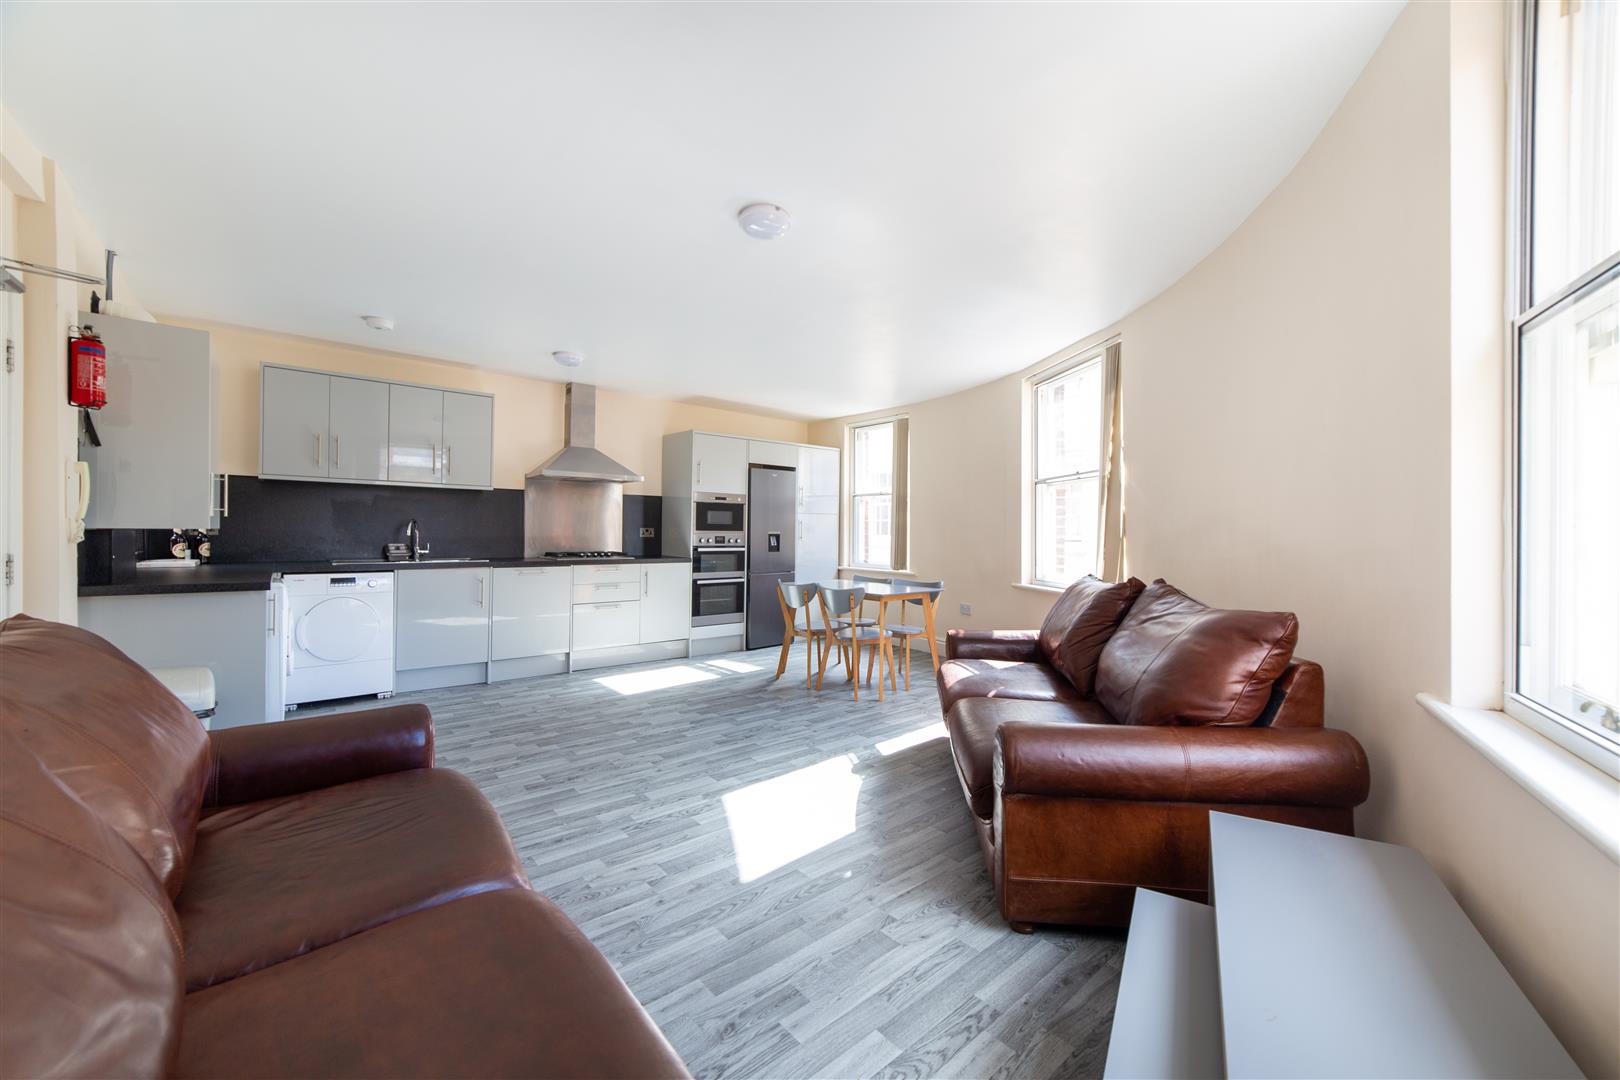 4 bed apartment to rent in Fenkle Street, Newcastle Upon Tyne, NE1 